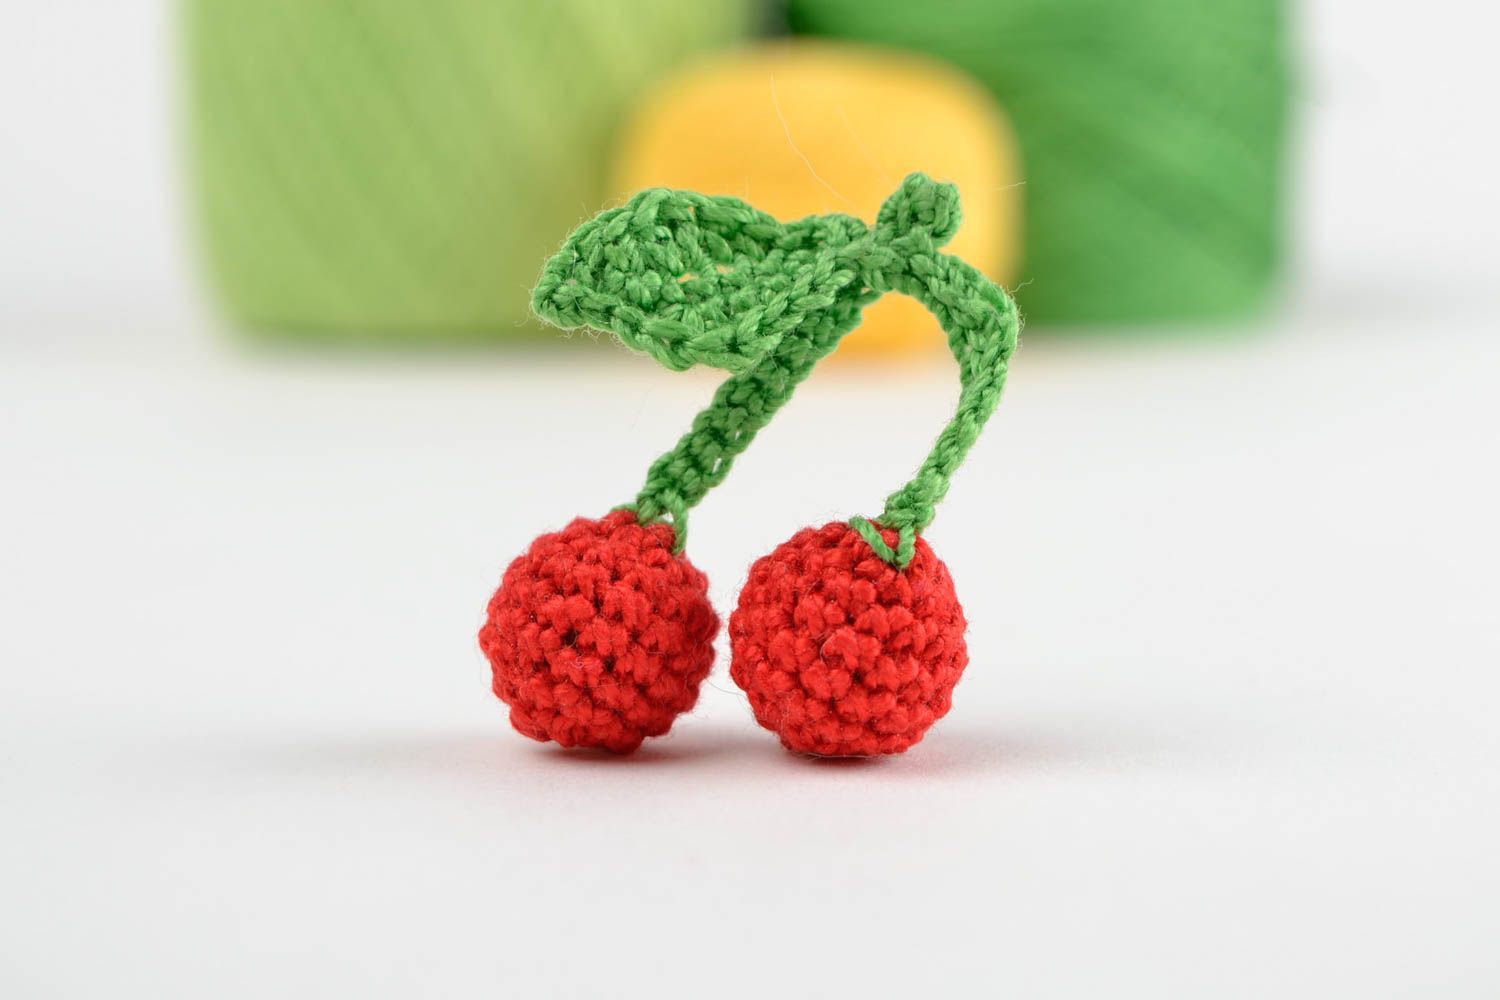 Handmade toy fruit toy unusual toys for children crocheted toy gift ideas photo 1